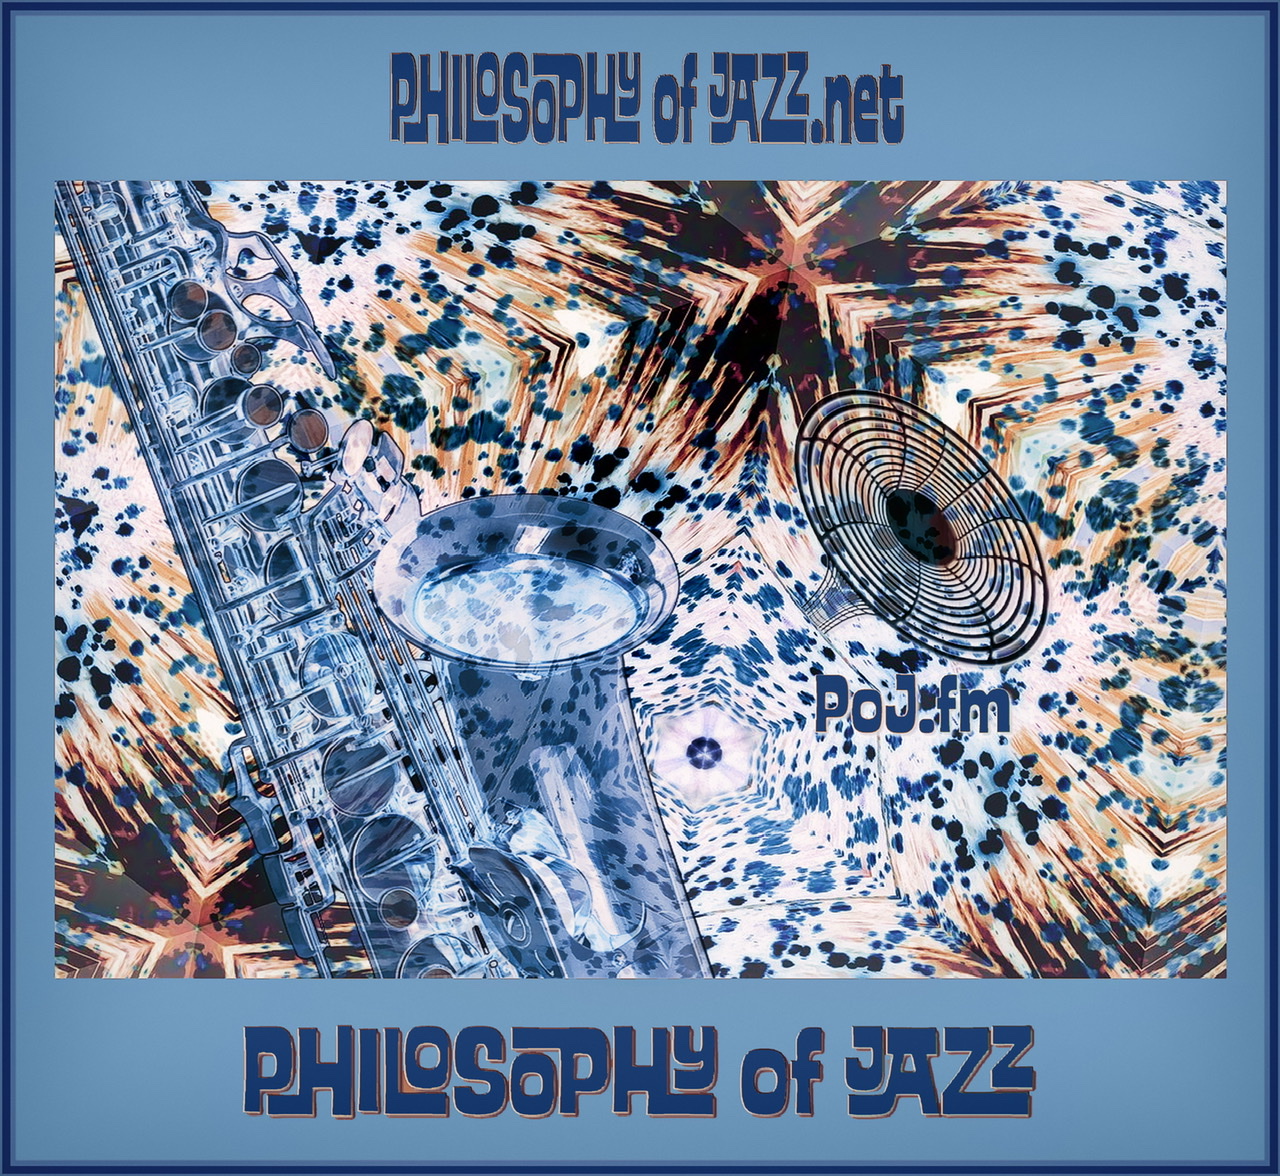 A baby blue framed graphic of a blue cast enlarged saxophone going off of the screen both top and bottom on left side with multicolored exploding abstract graphic patterns on right side with PoJ.fm logos.